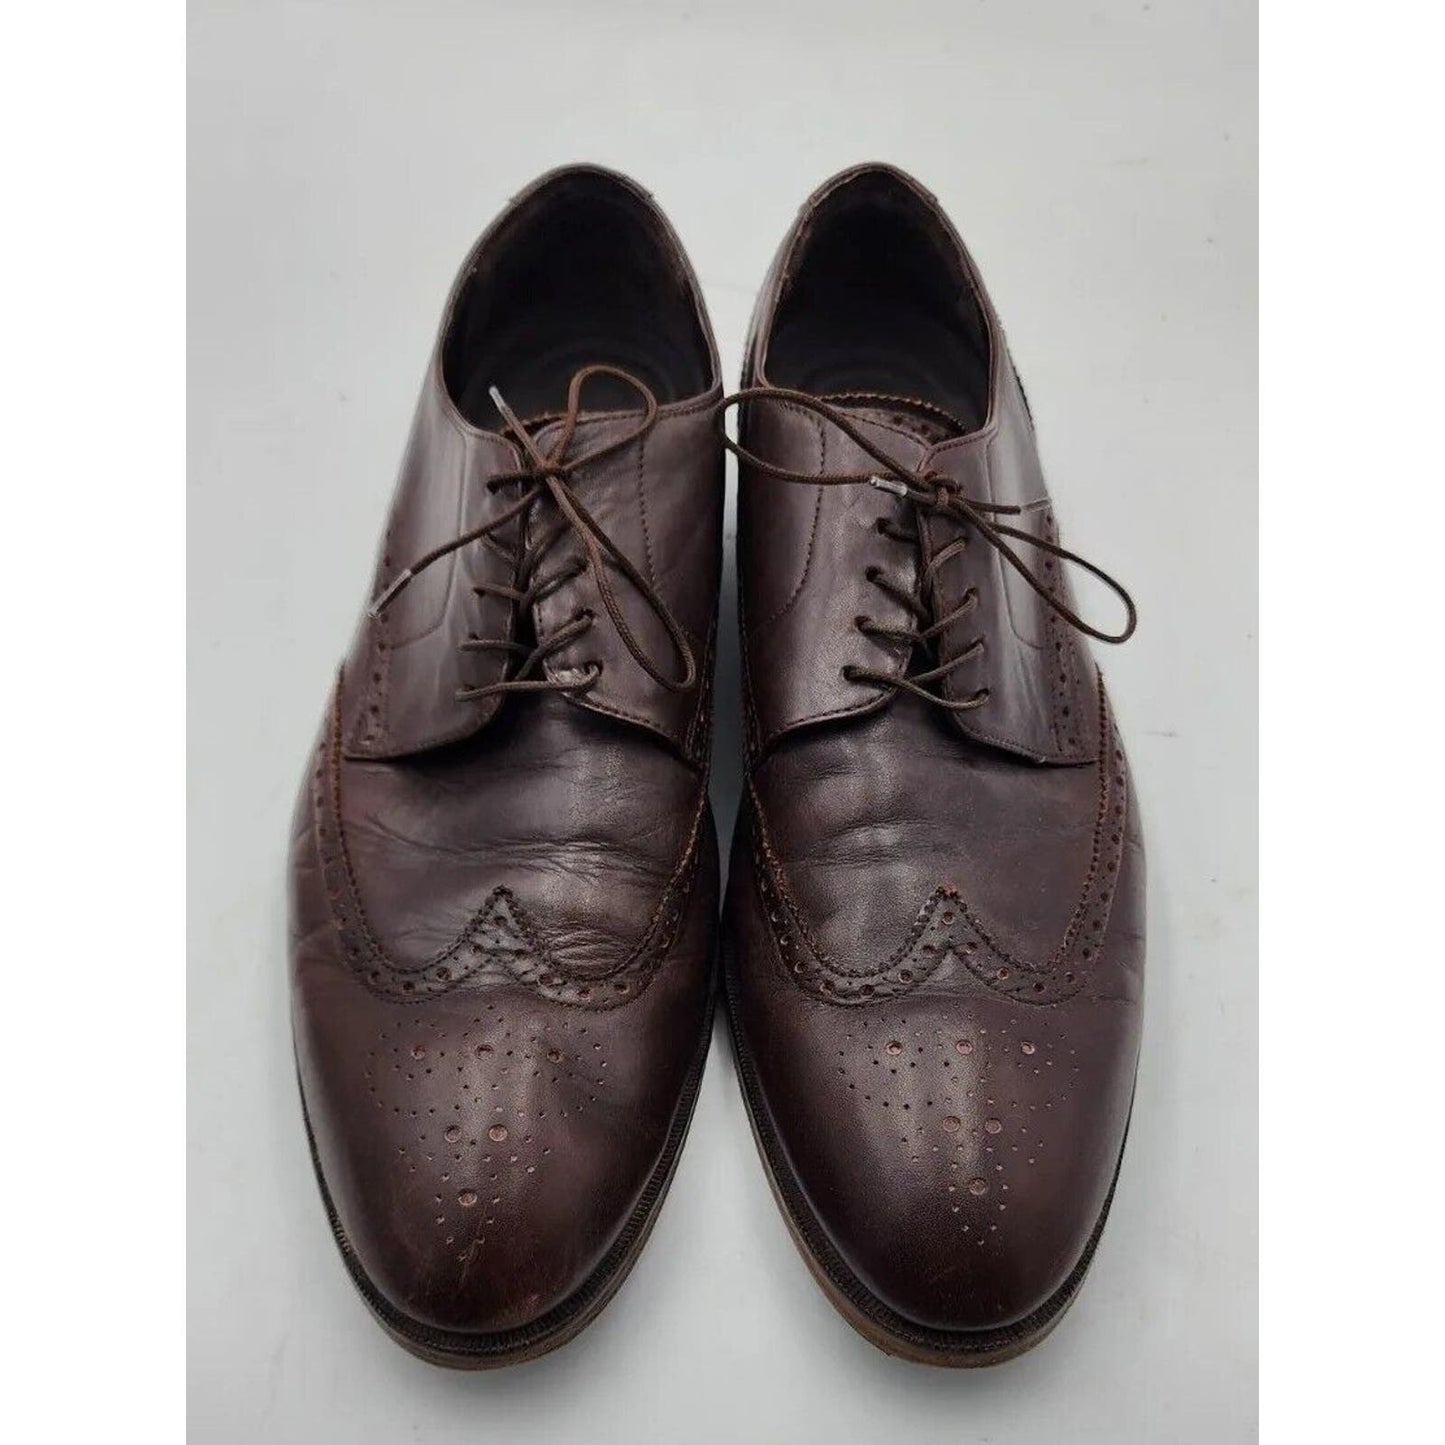 Cole Haan Grand OS Warren Dark Brown Leather Wing tip Oxfords Mens Size 12 M US